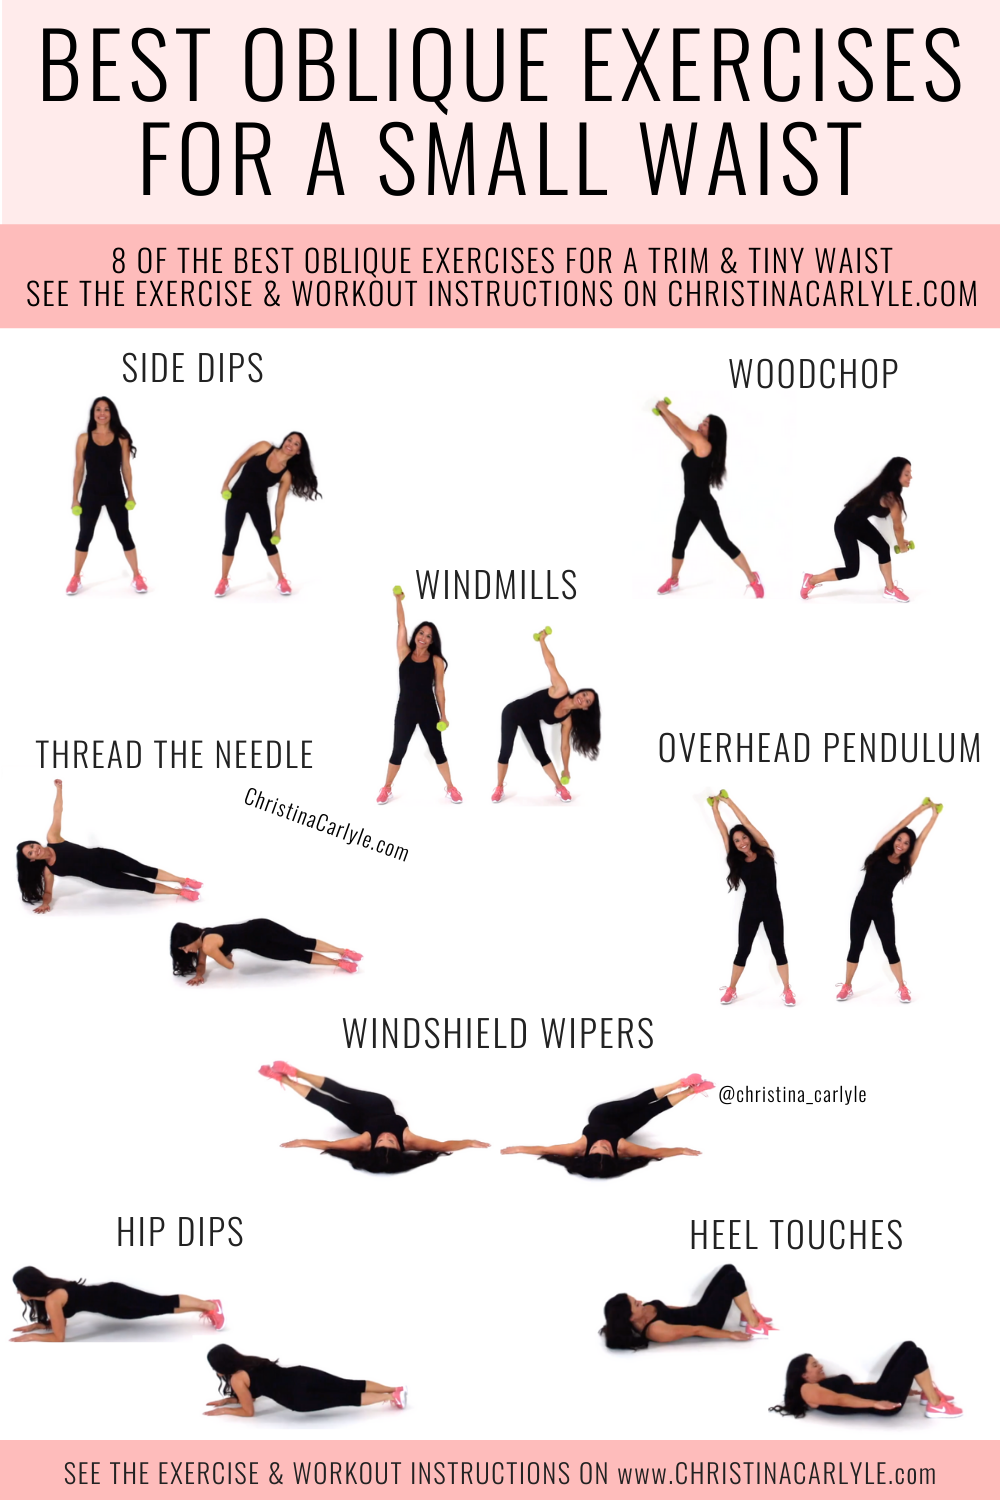 Strengthen Your Side Waist Muscles, Free Your Pelvis